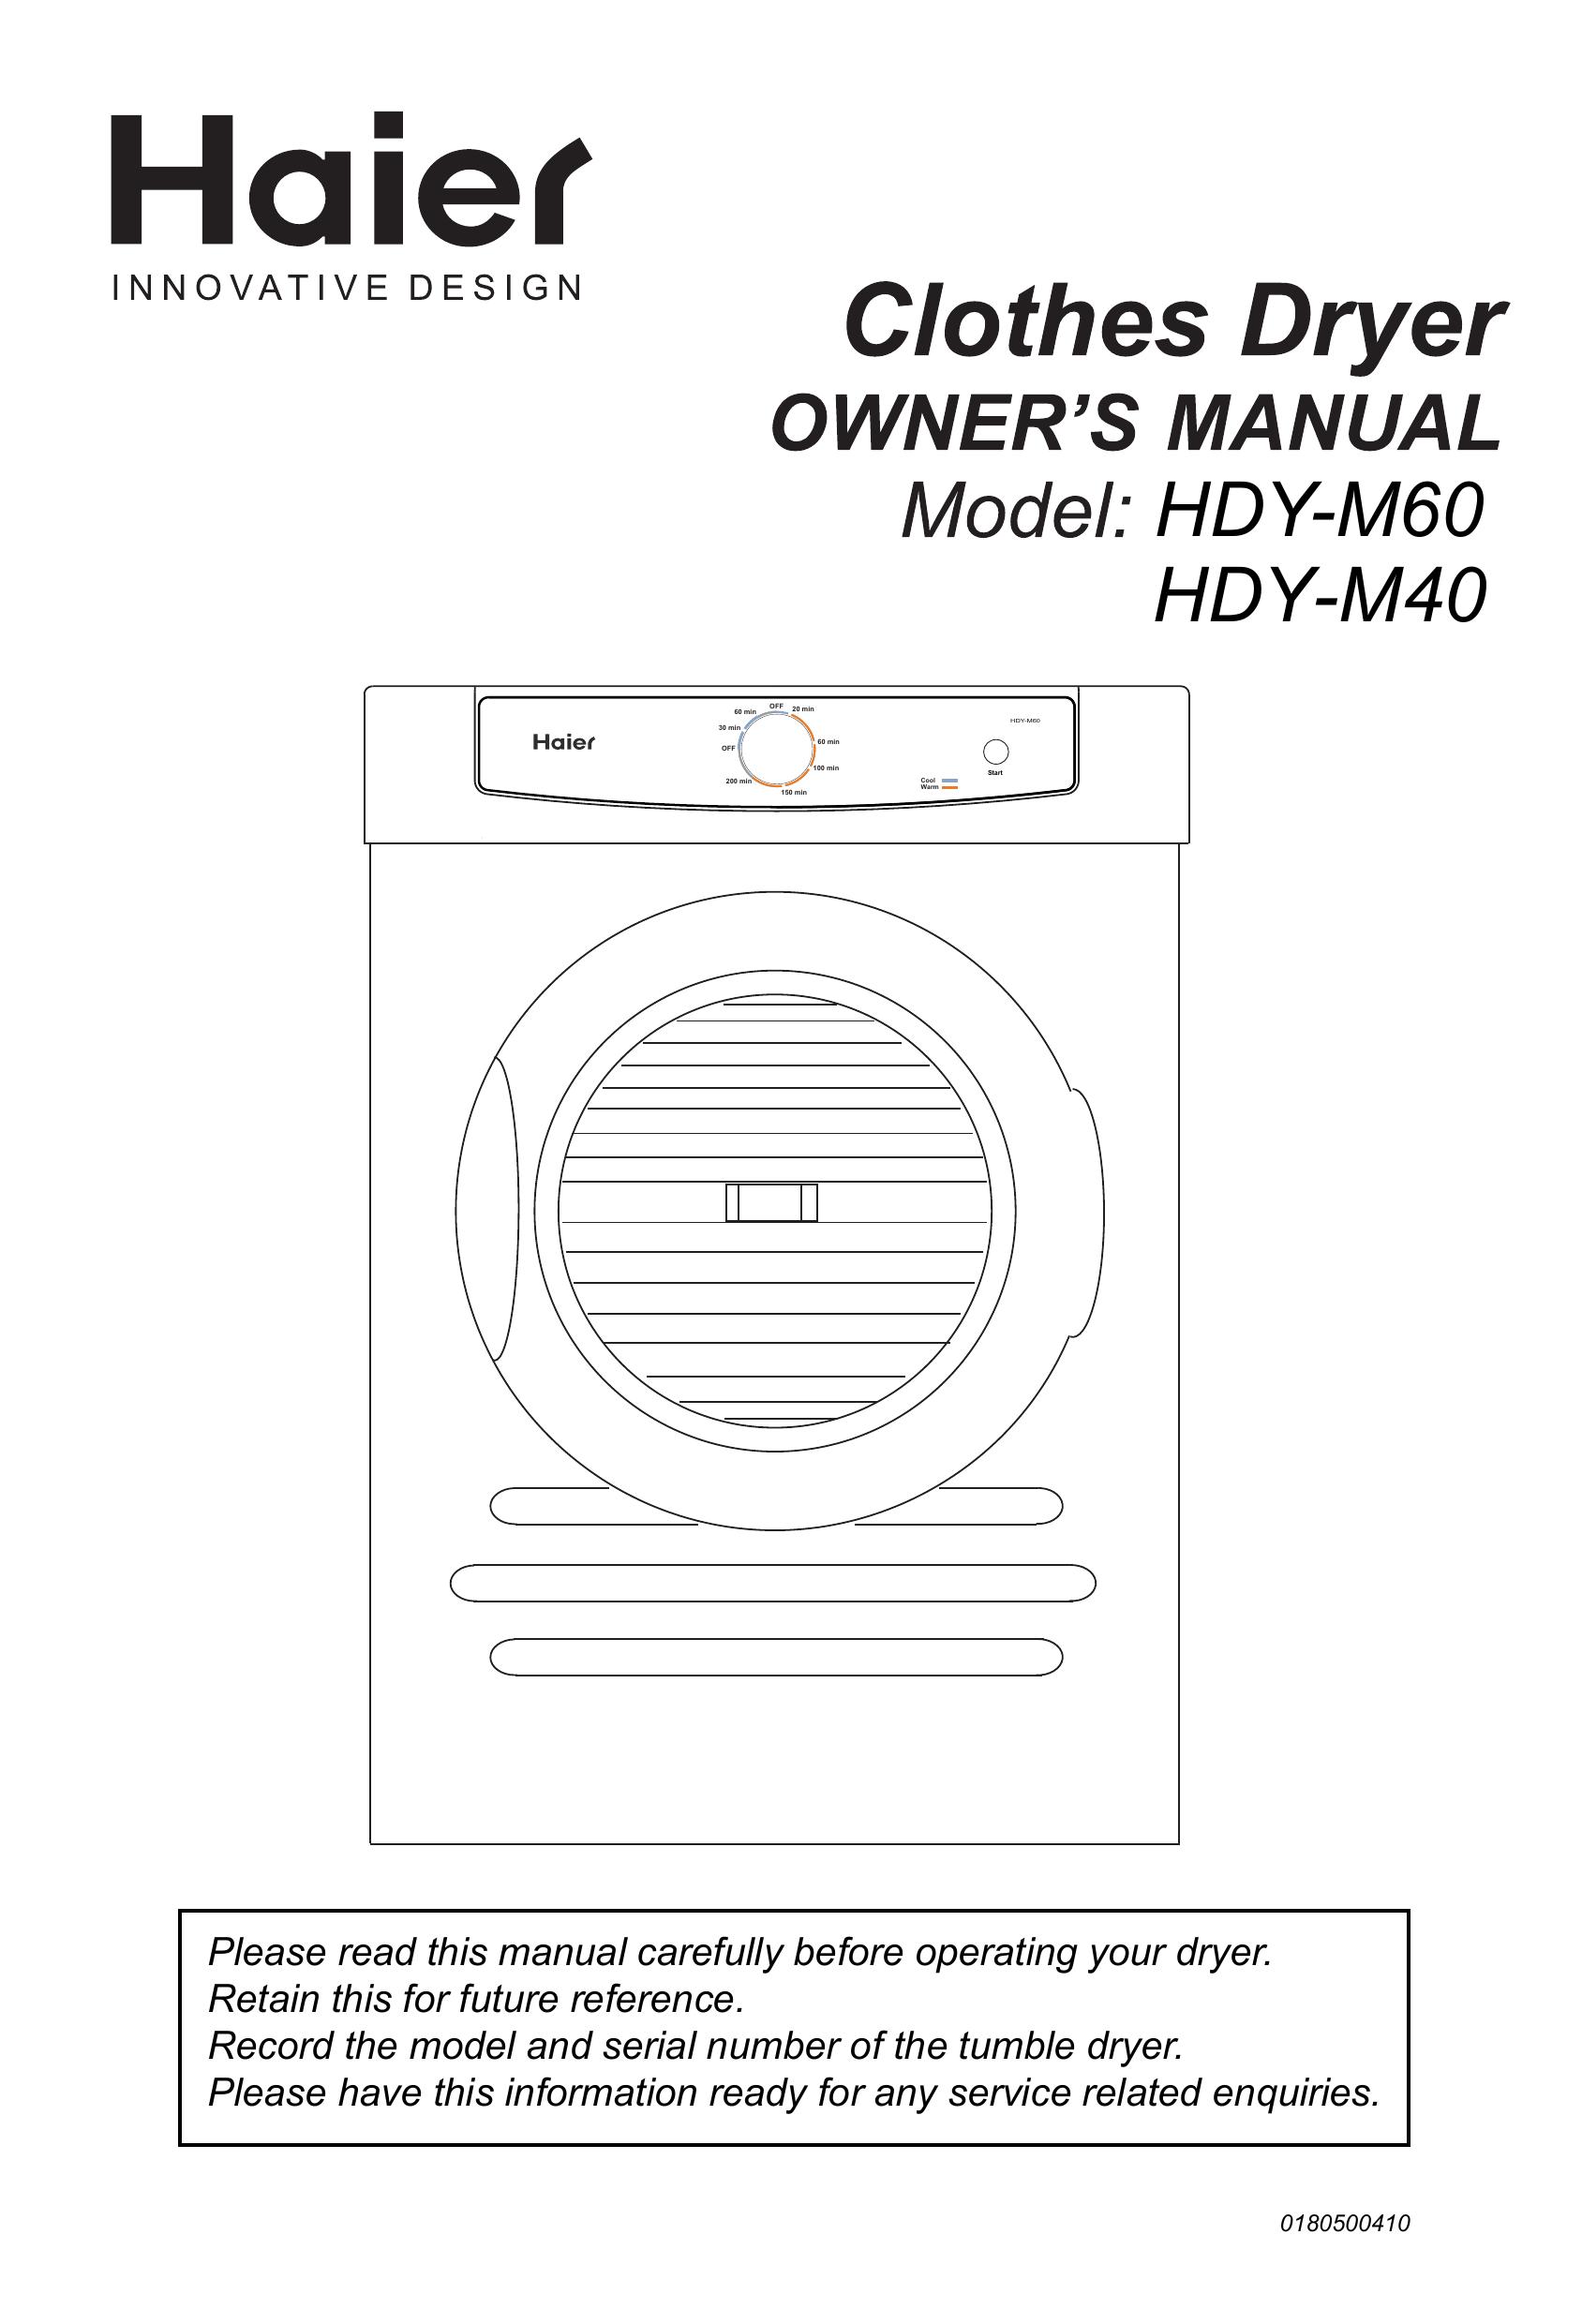 Haier HDY-M60 Dryer Accessories User Manual (Page 1)